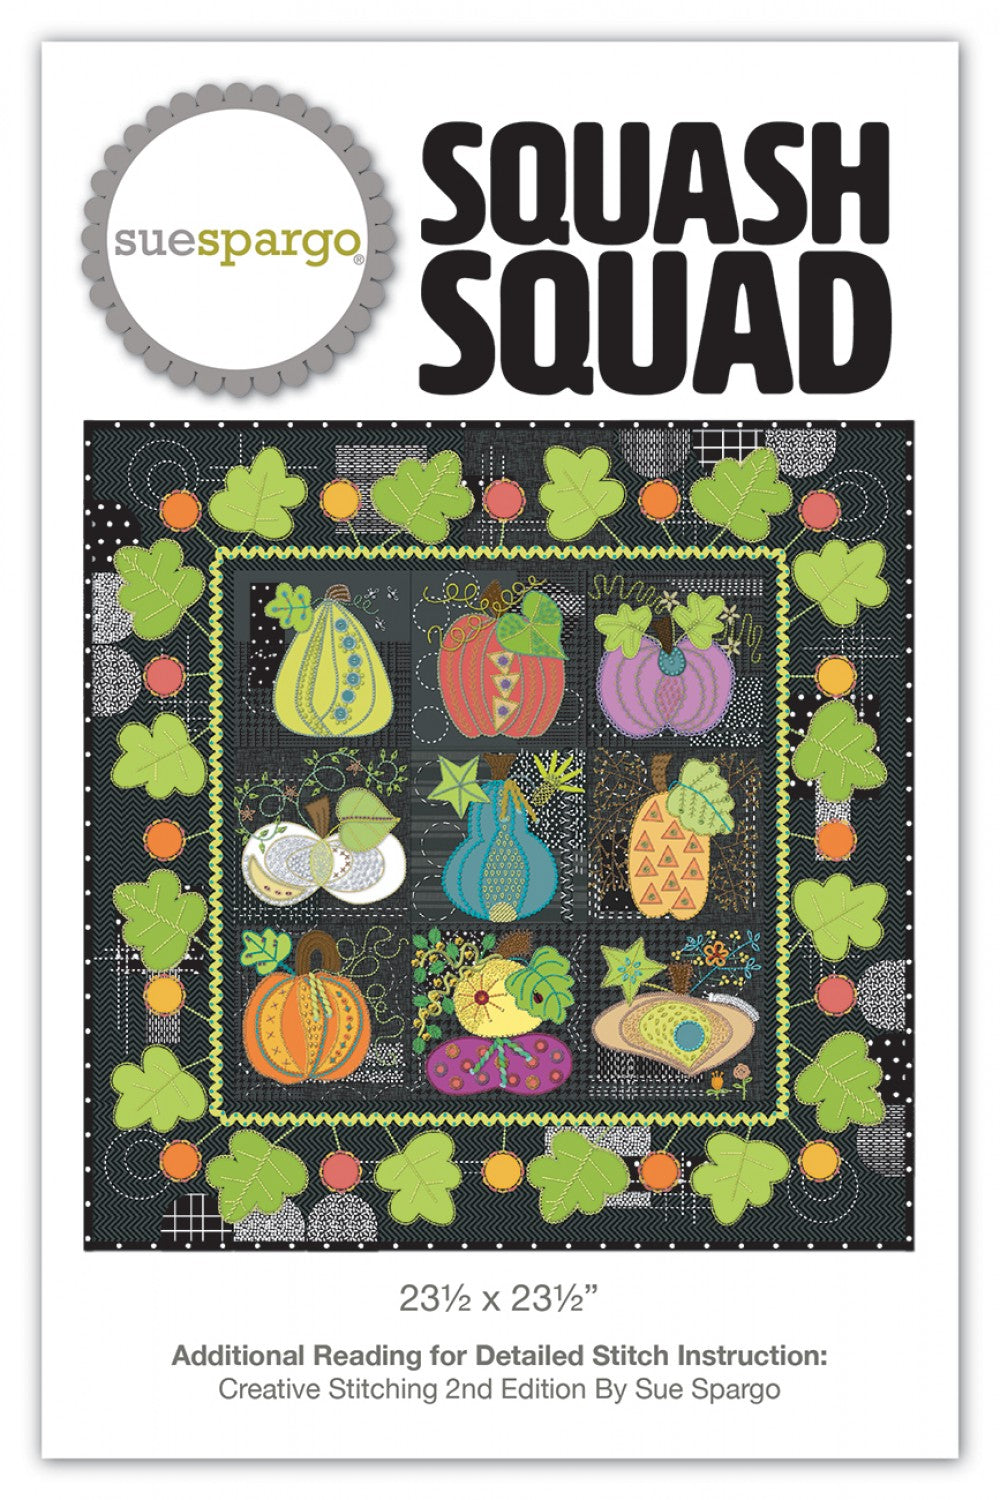 Squash Squad - Applique, Embroidery, and Quilting Pattern by Sue Spargo of Folk Art Quilts